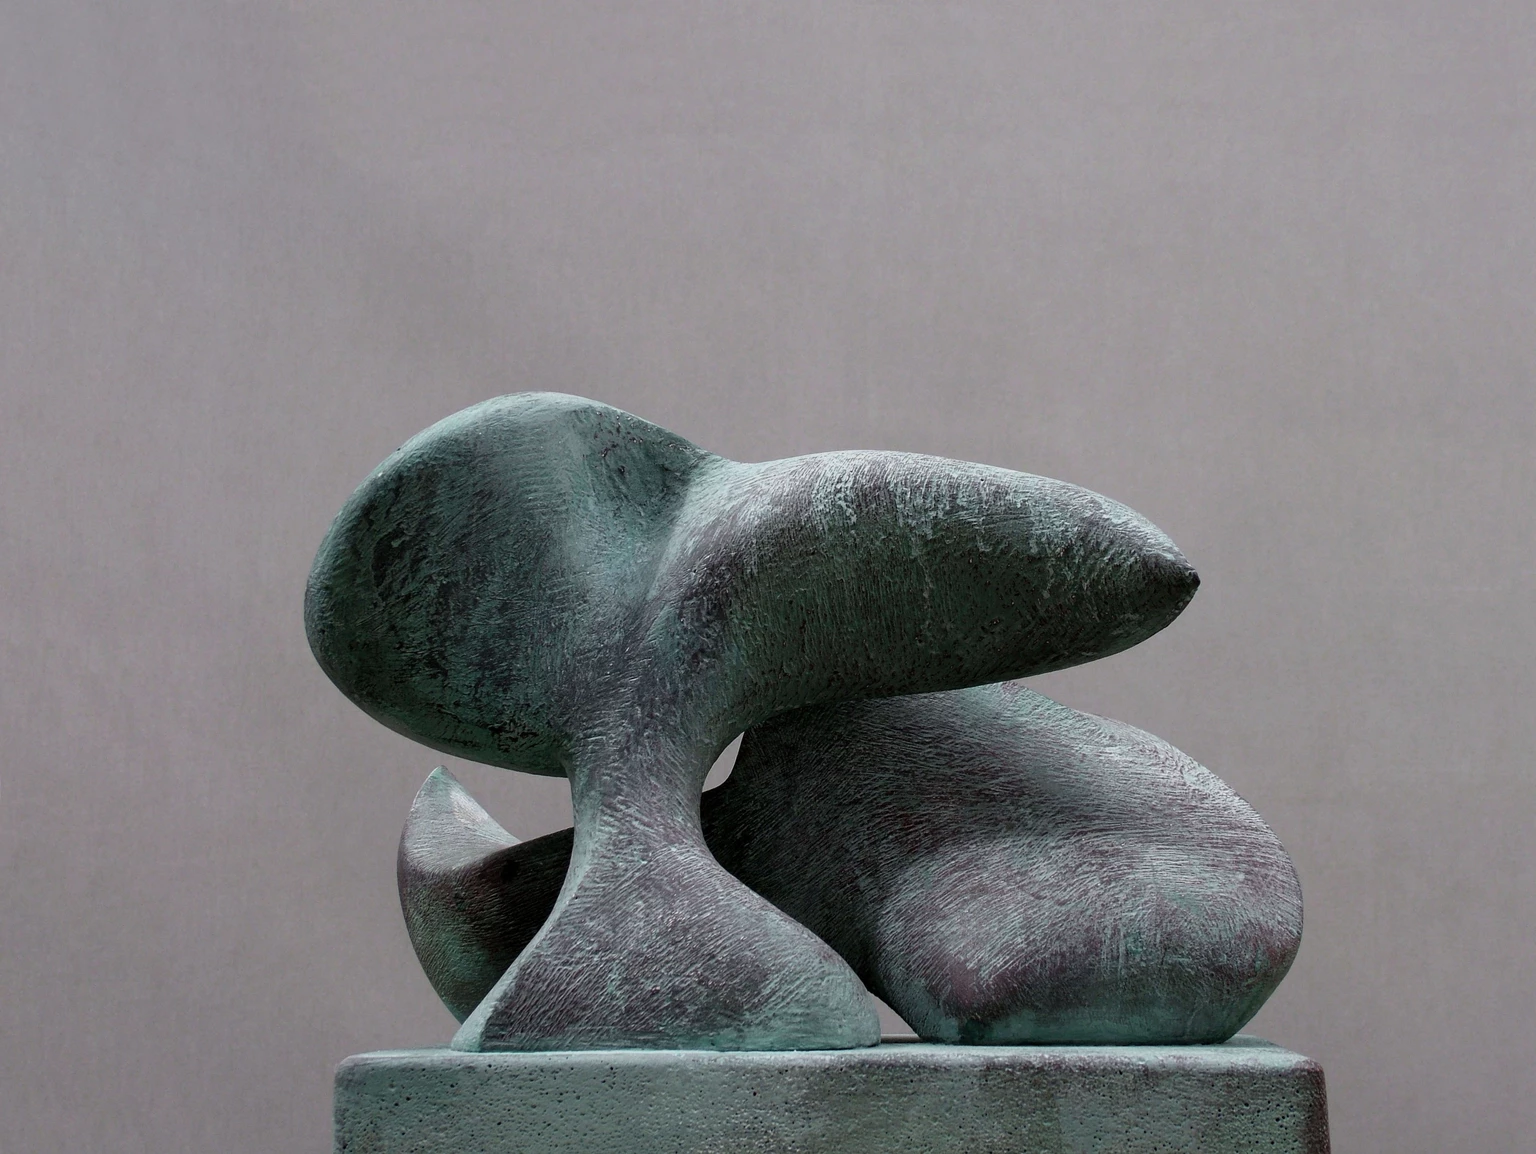 Complementary, 1987 - painted plaster, 28 x 20 x 32,5 cm